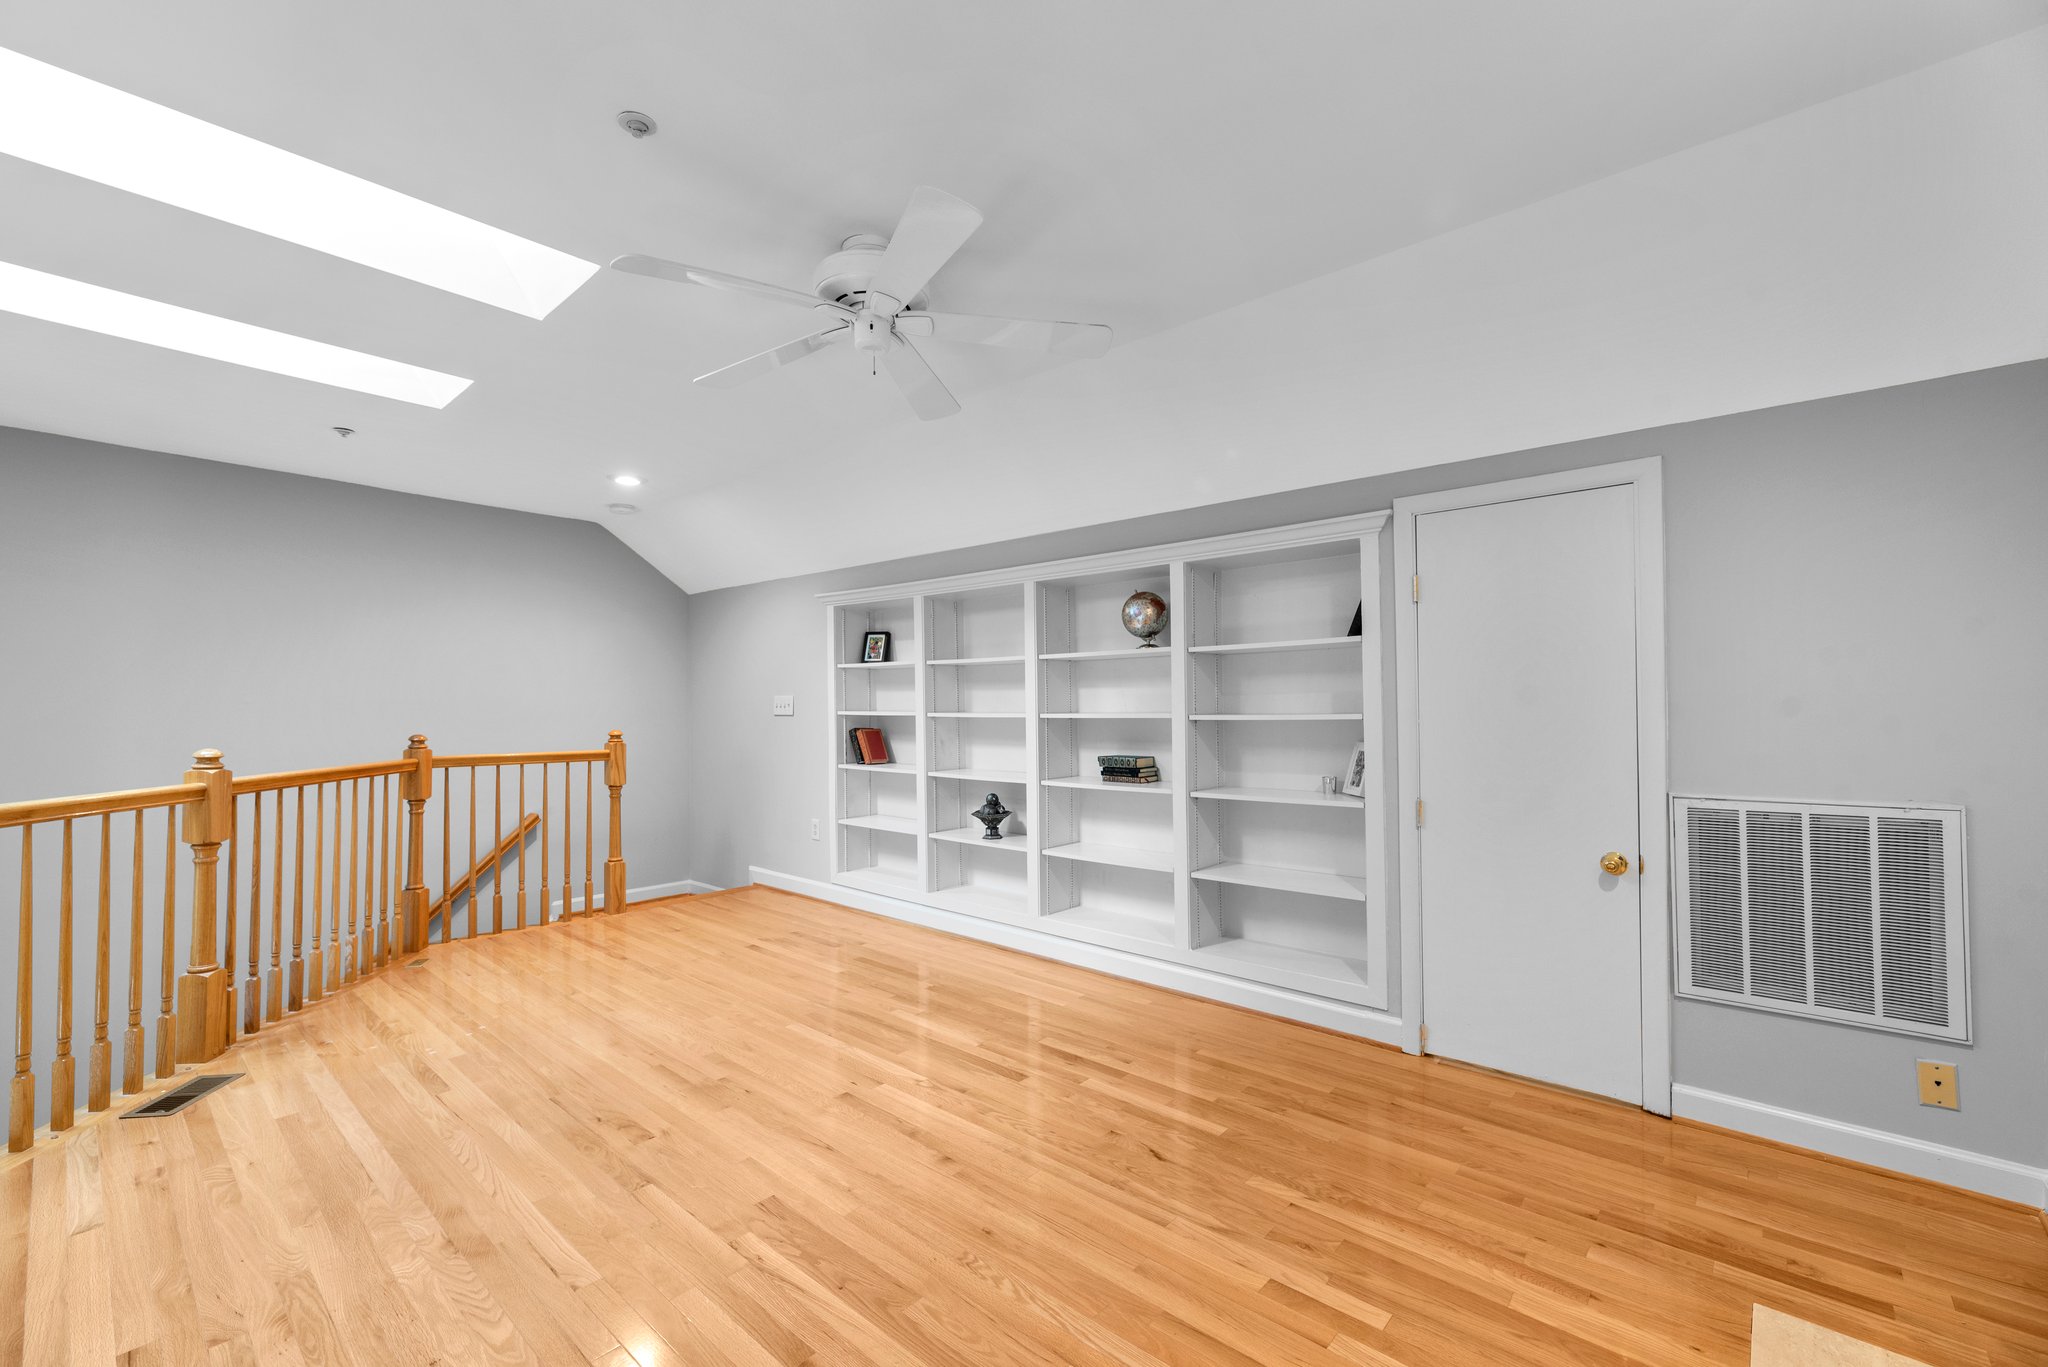 The owner had an additional storage room off the Loft accessible through a full height door